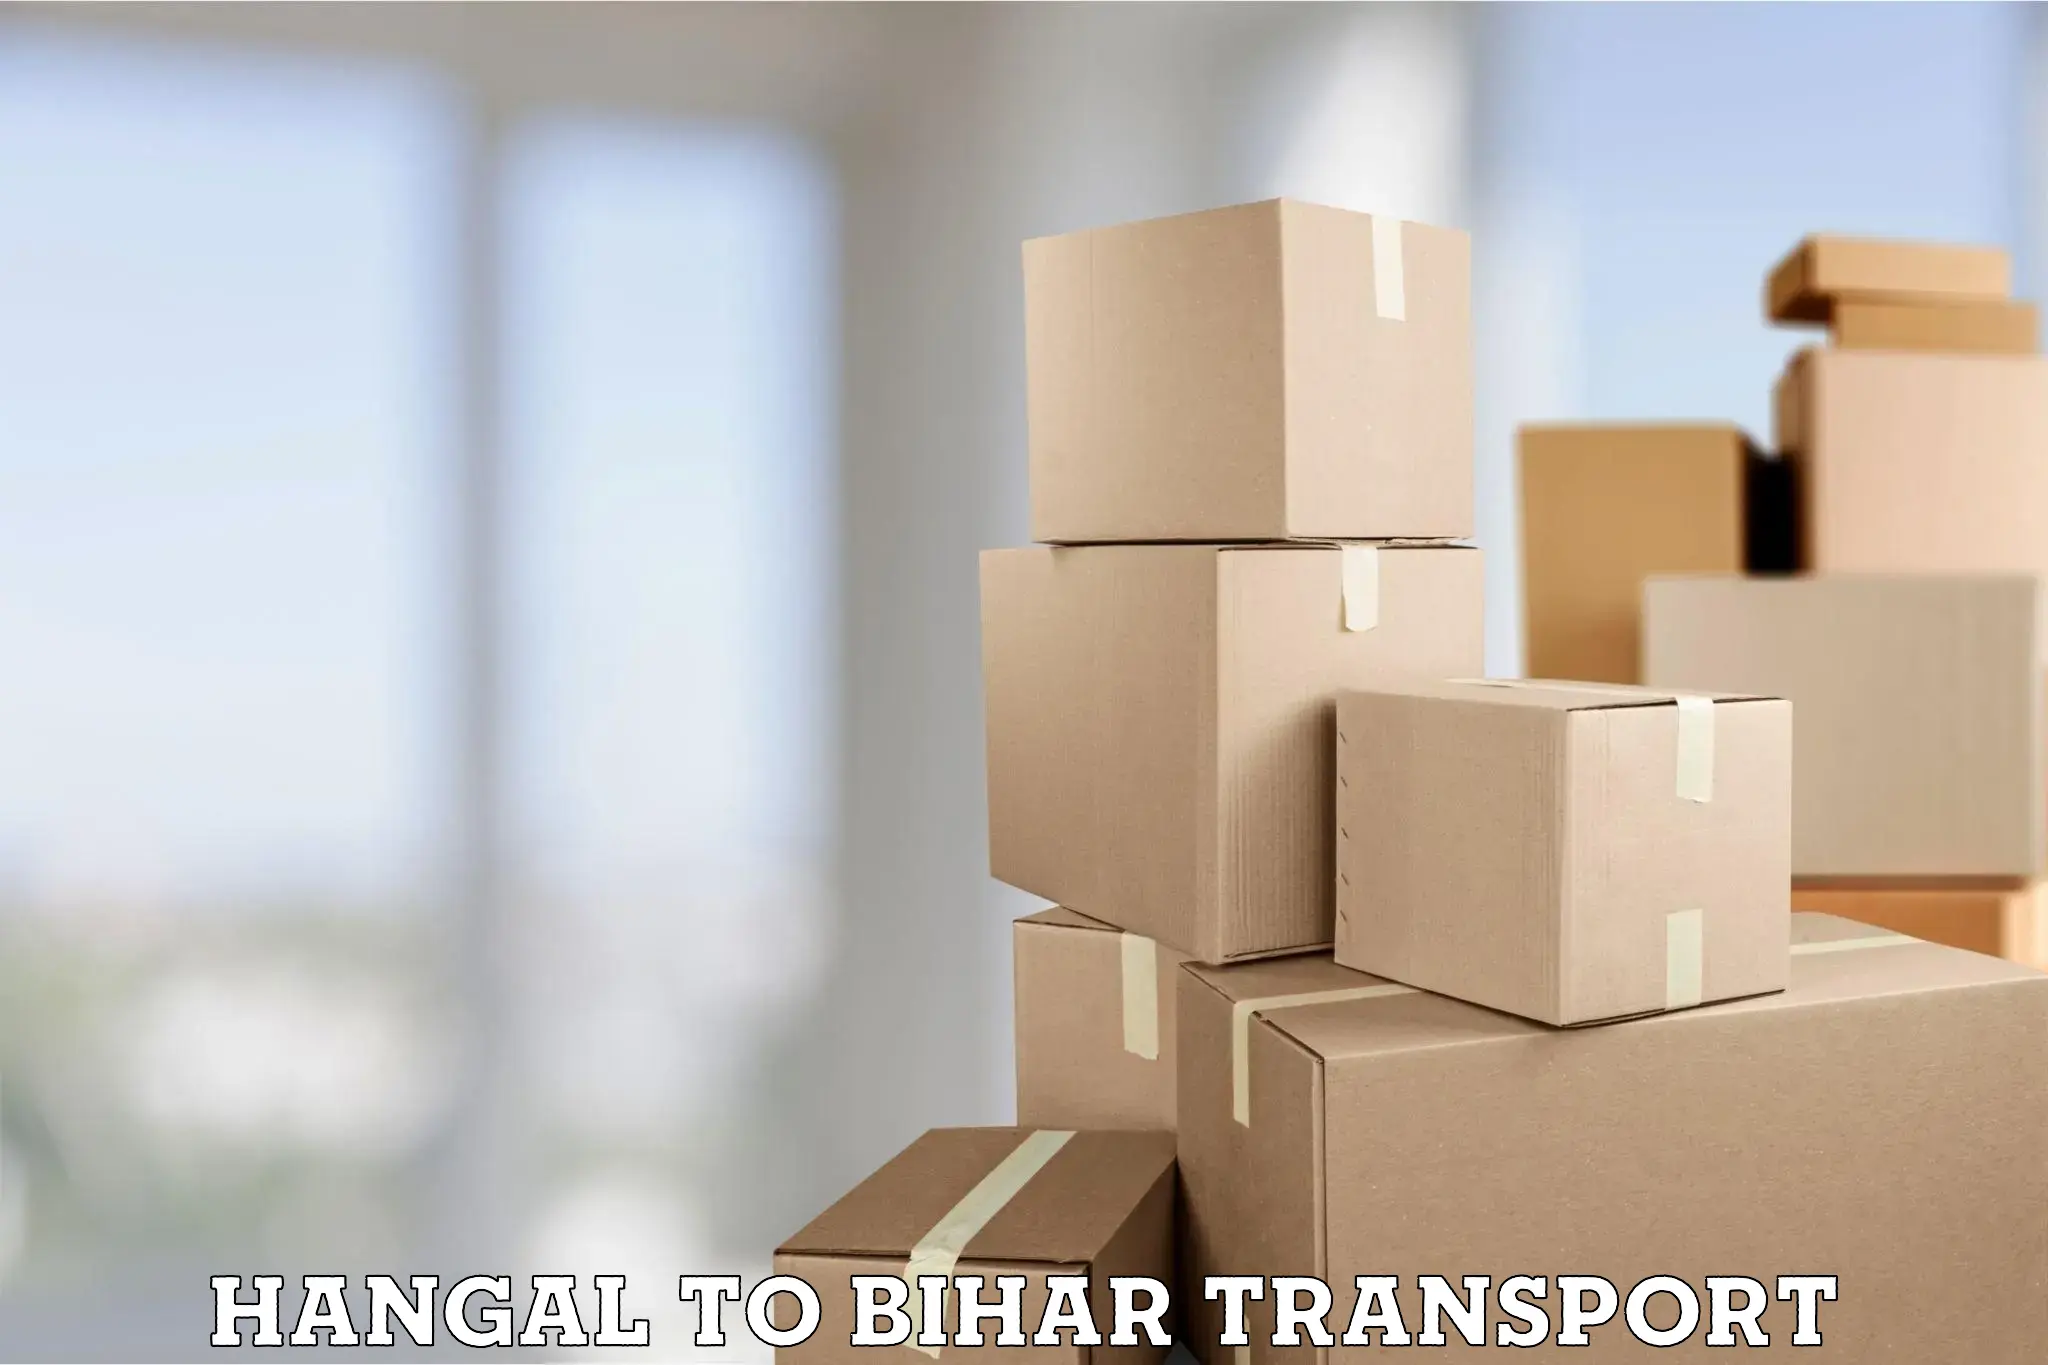 Daily transport service Hangal to Buxar